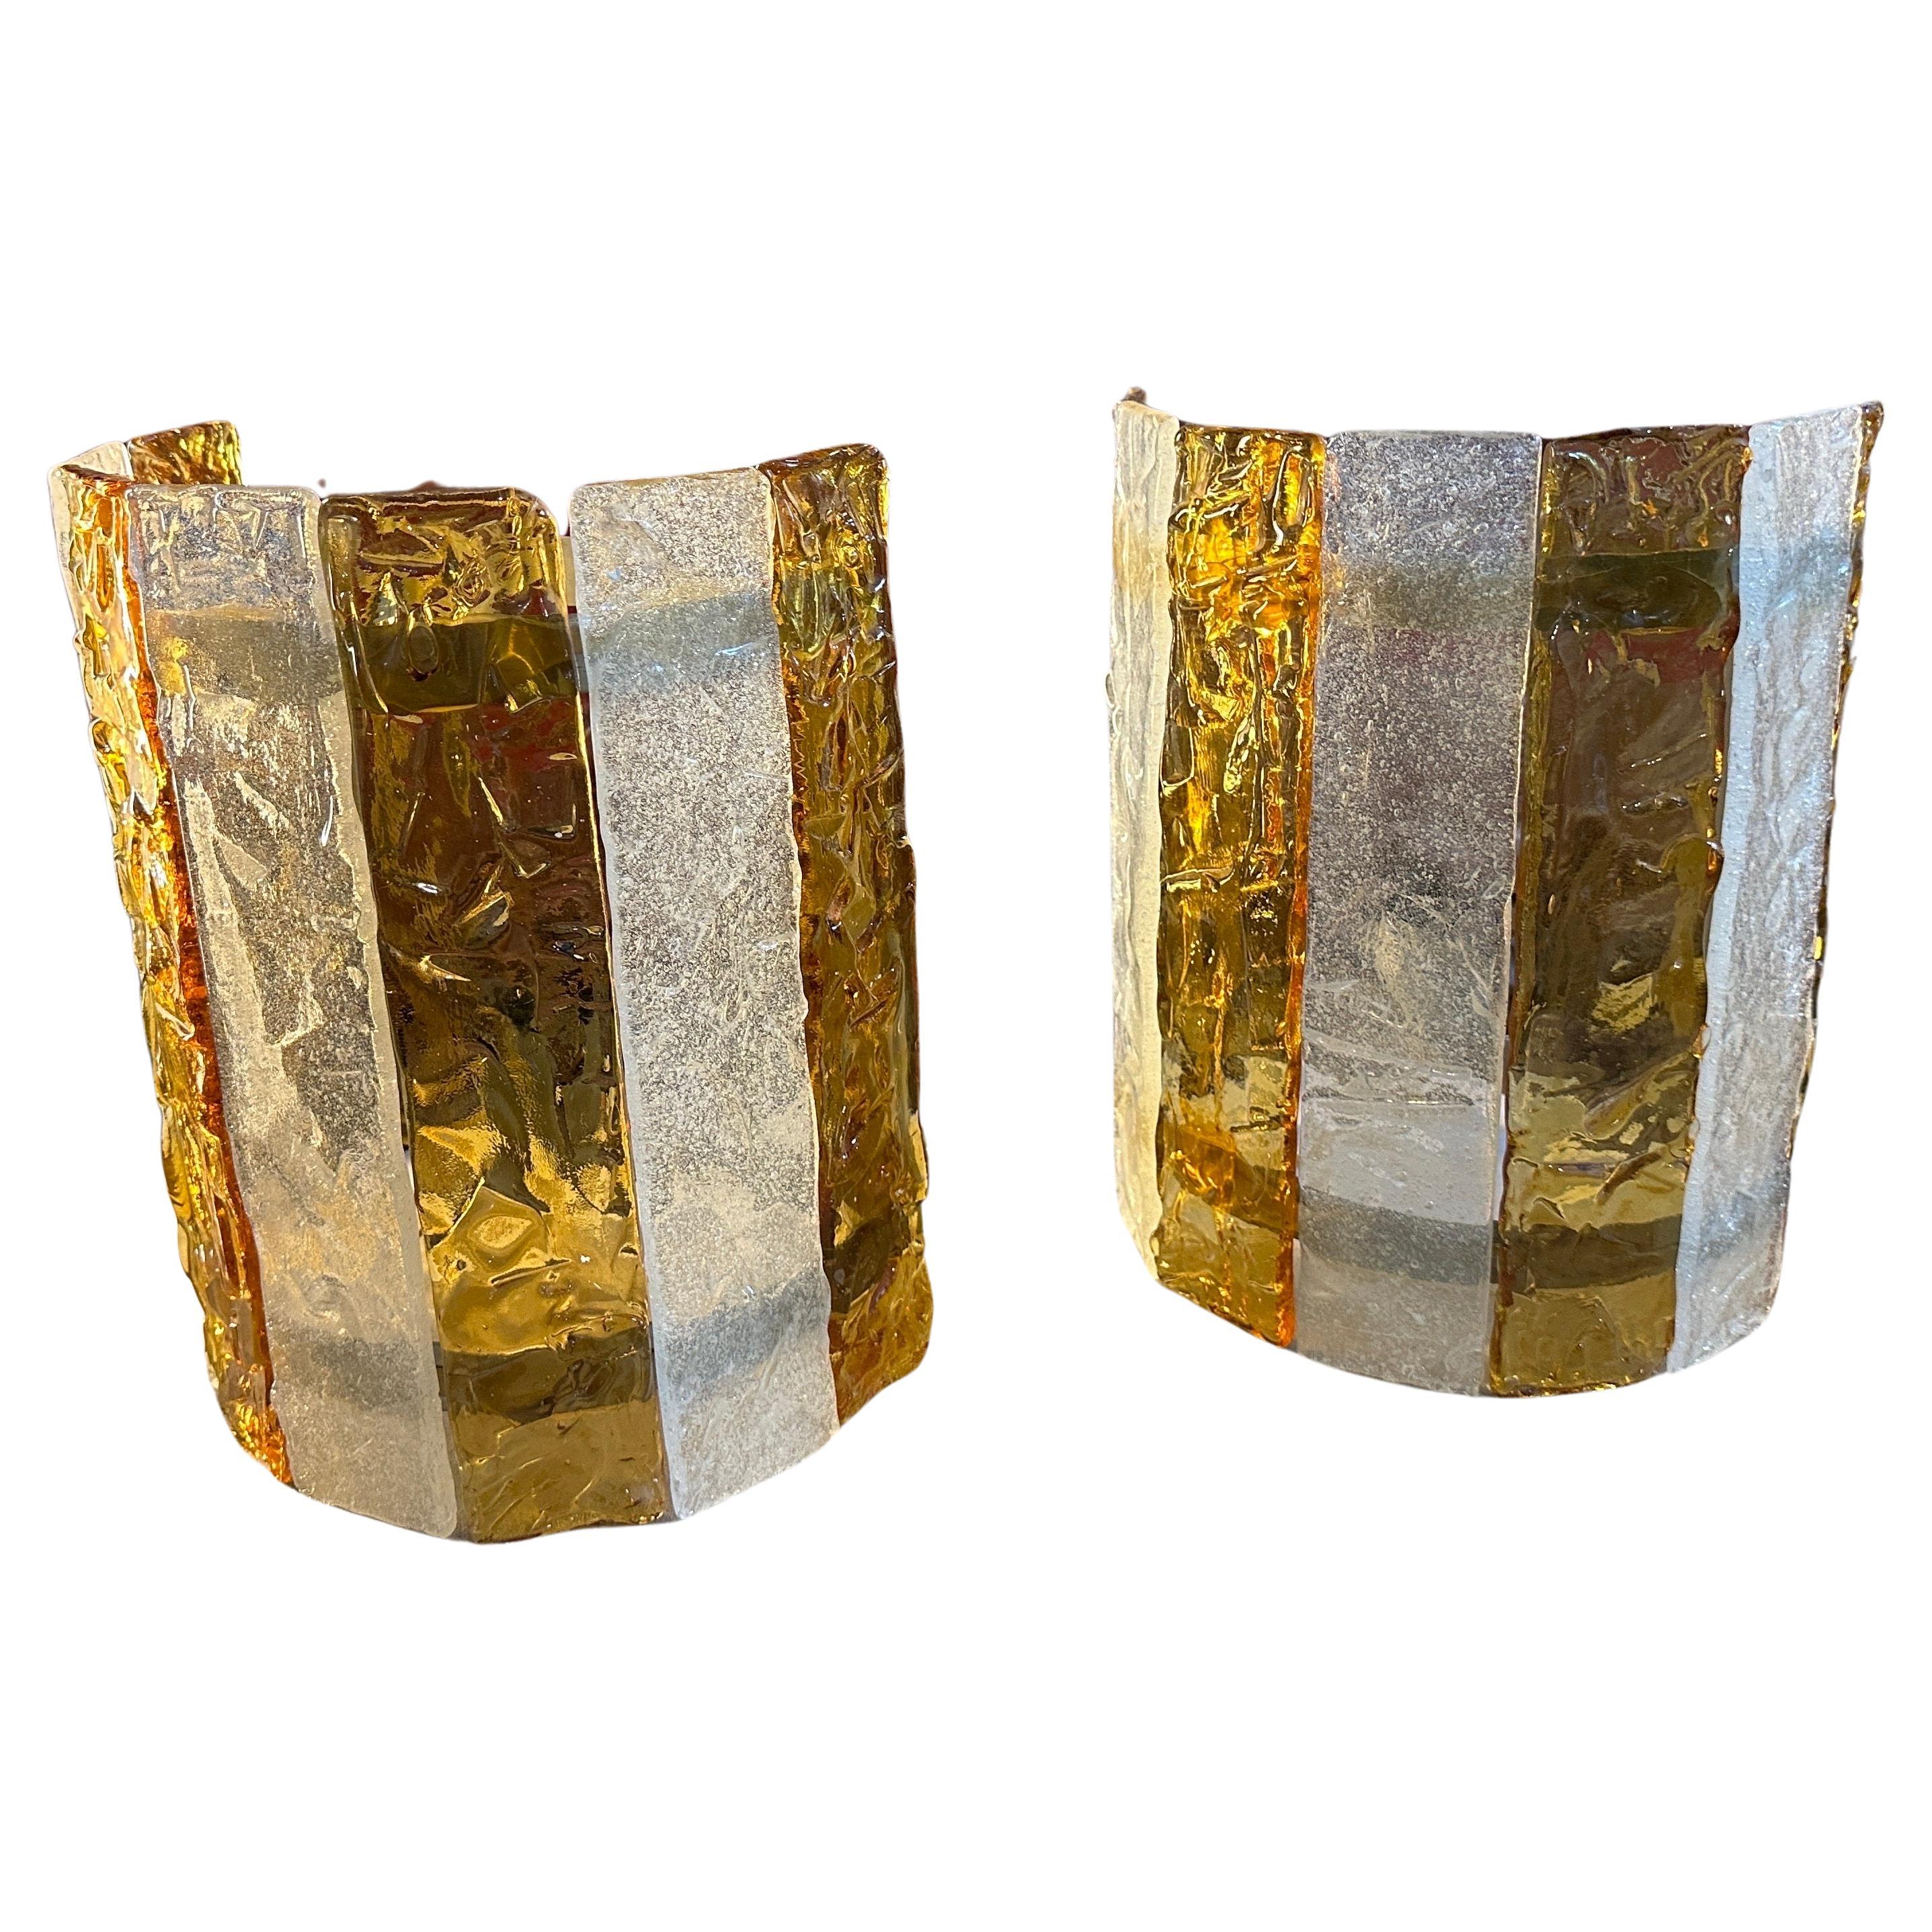 Two 70s Mid-Century Modern White and Yellow Murano Glass Wall Sconces by Mazzega